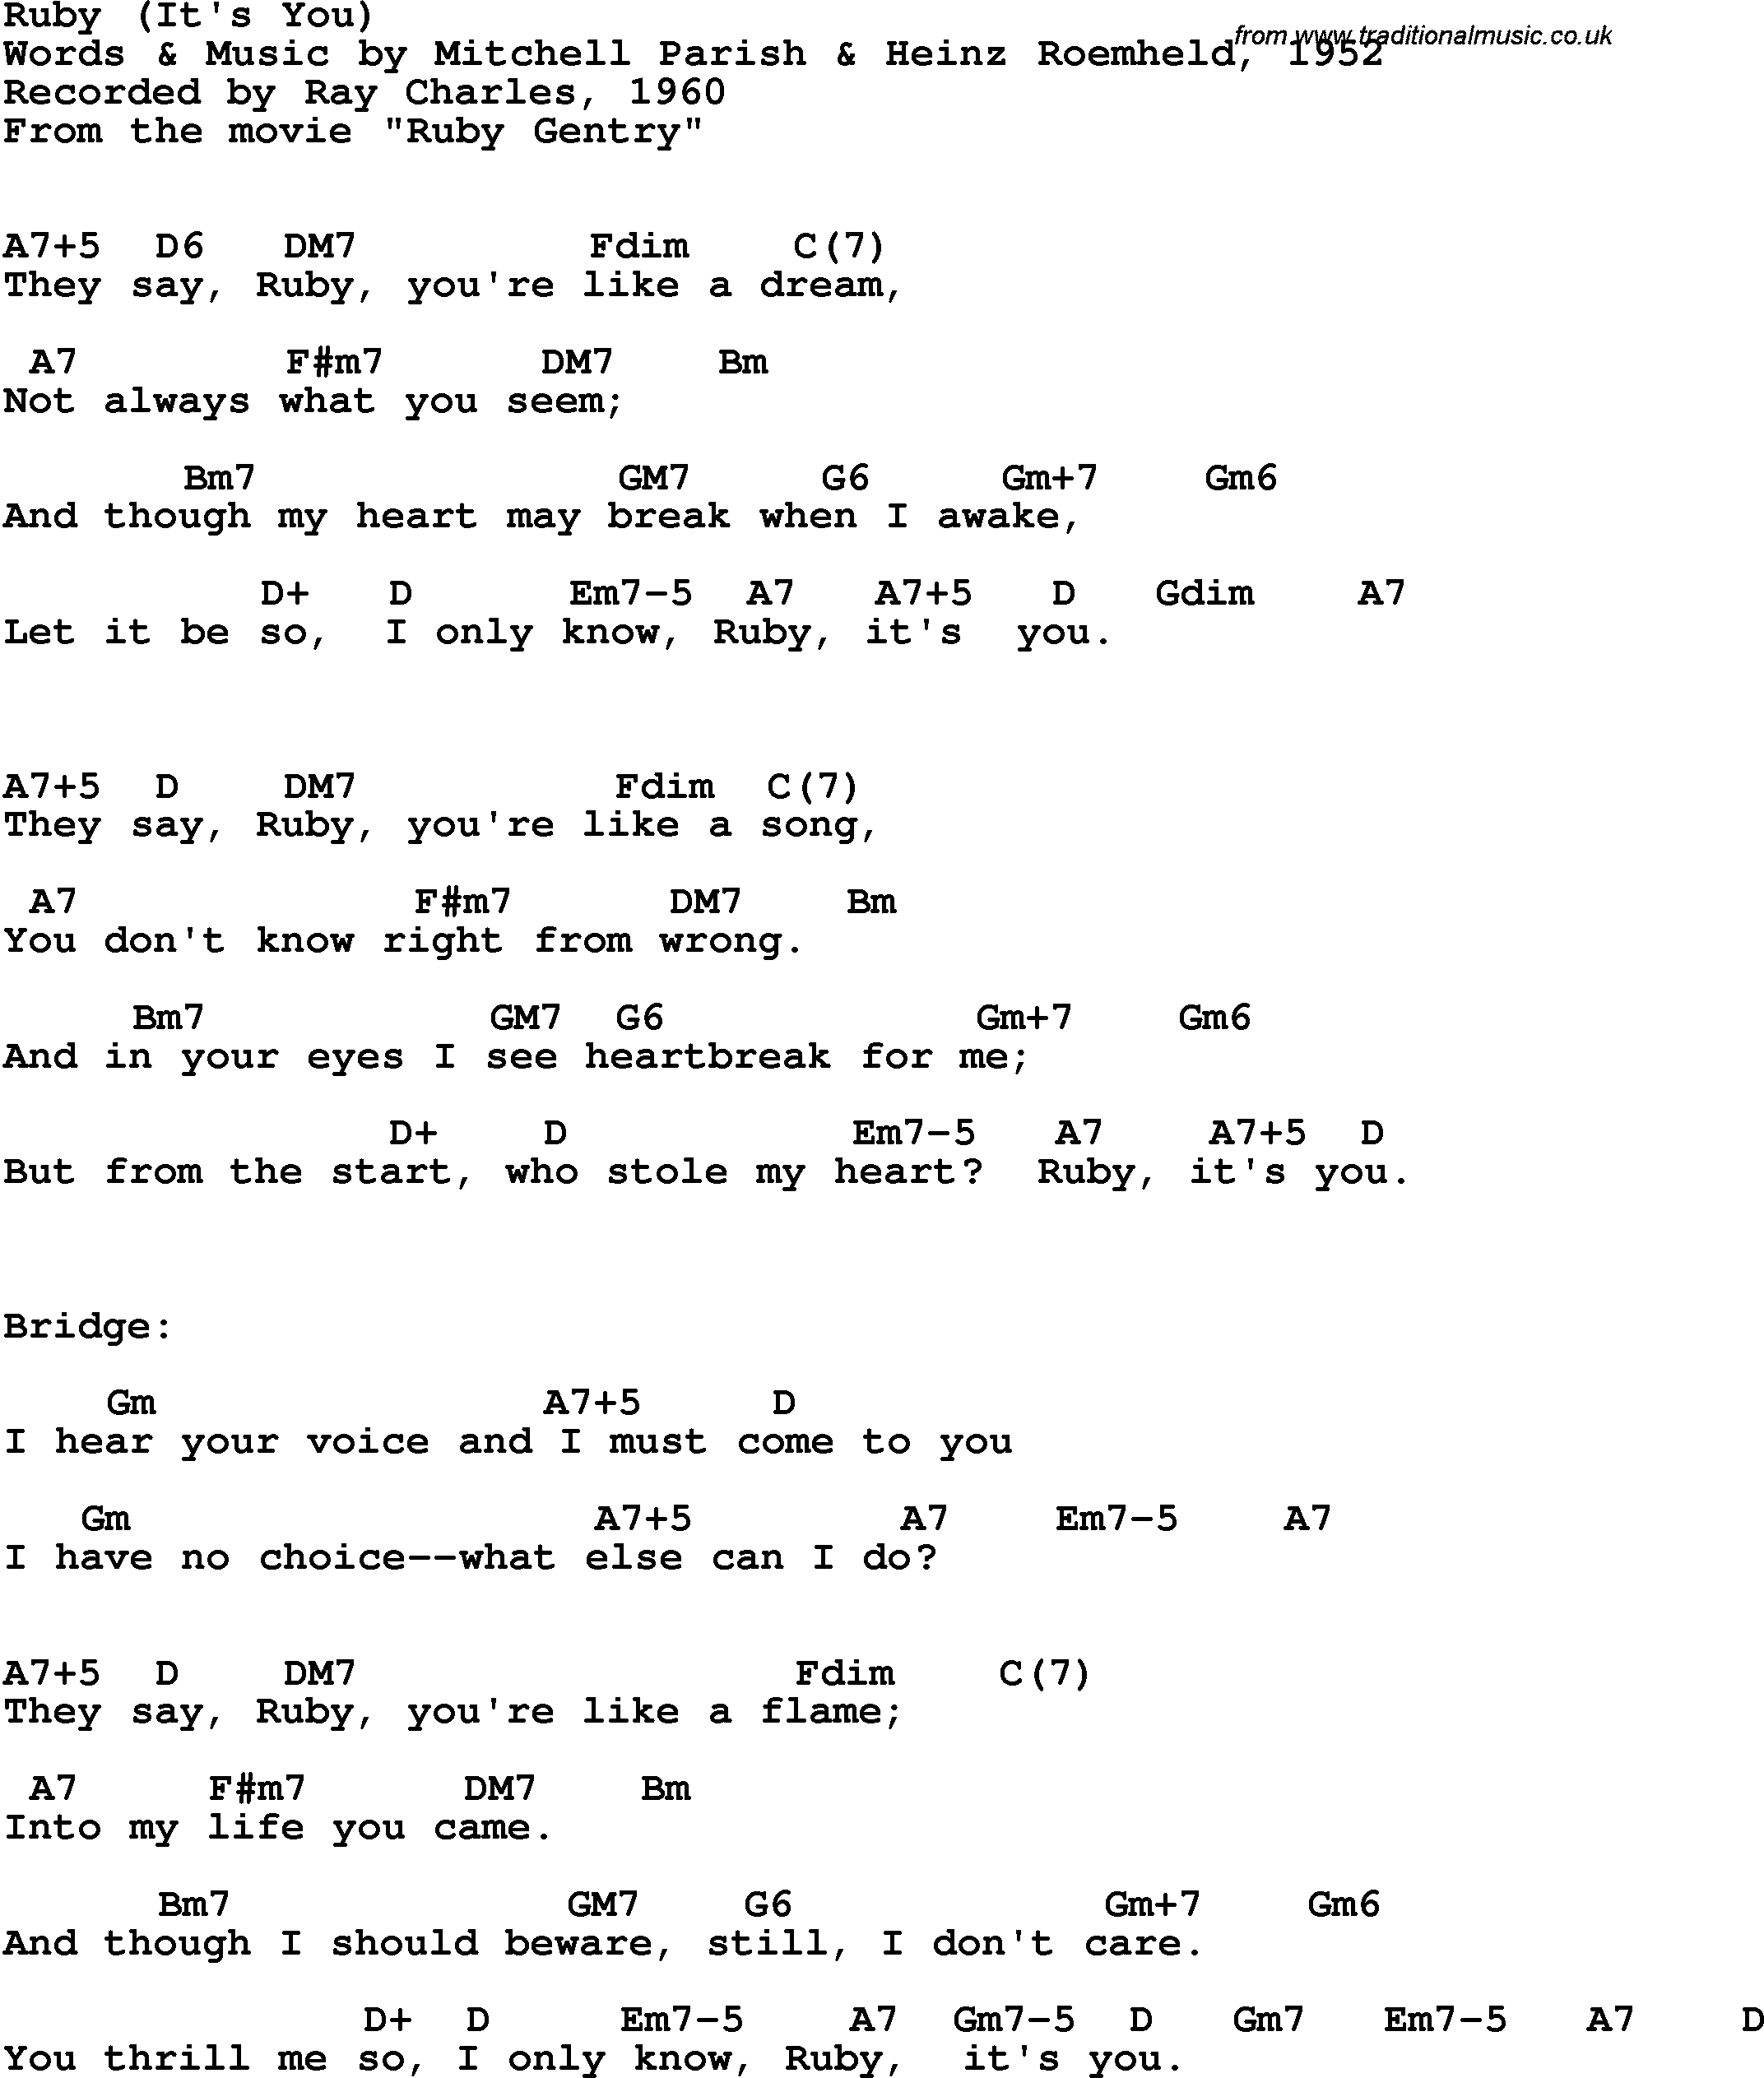 Song Lyrics with guitar chords for Ruby (It's You) - Ray Charles, 1960